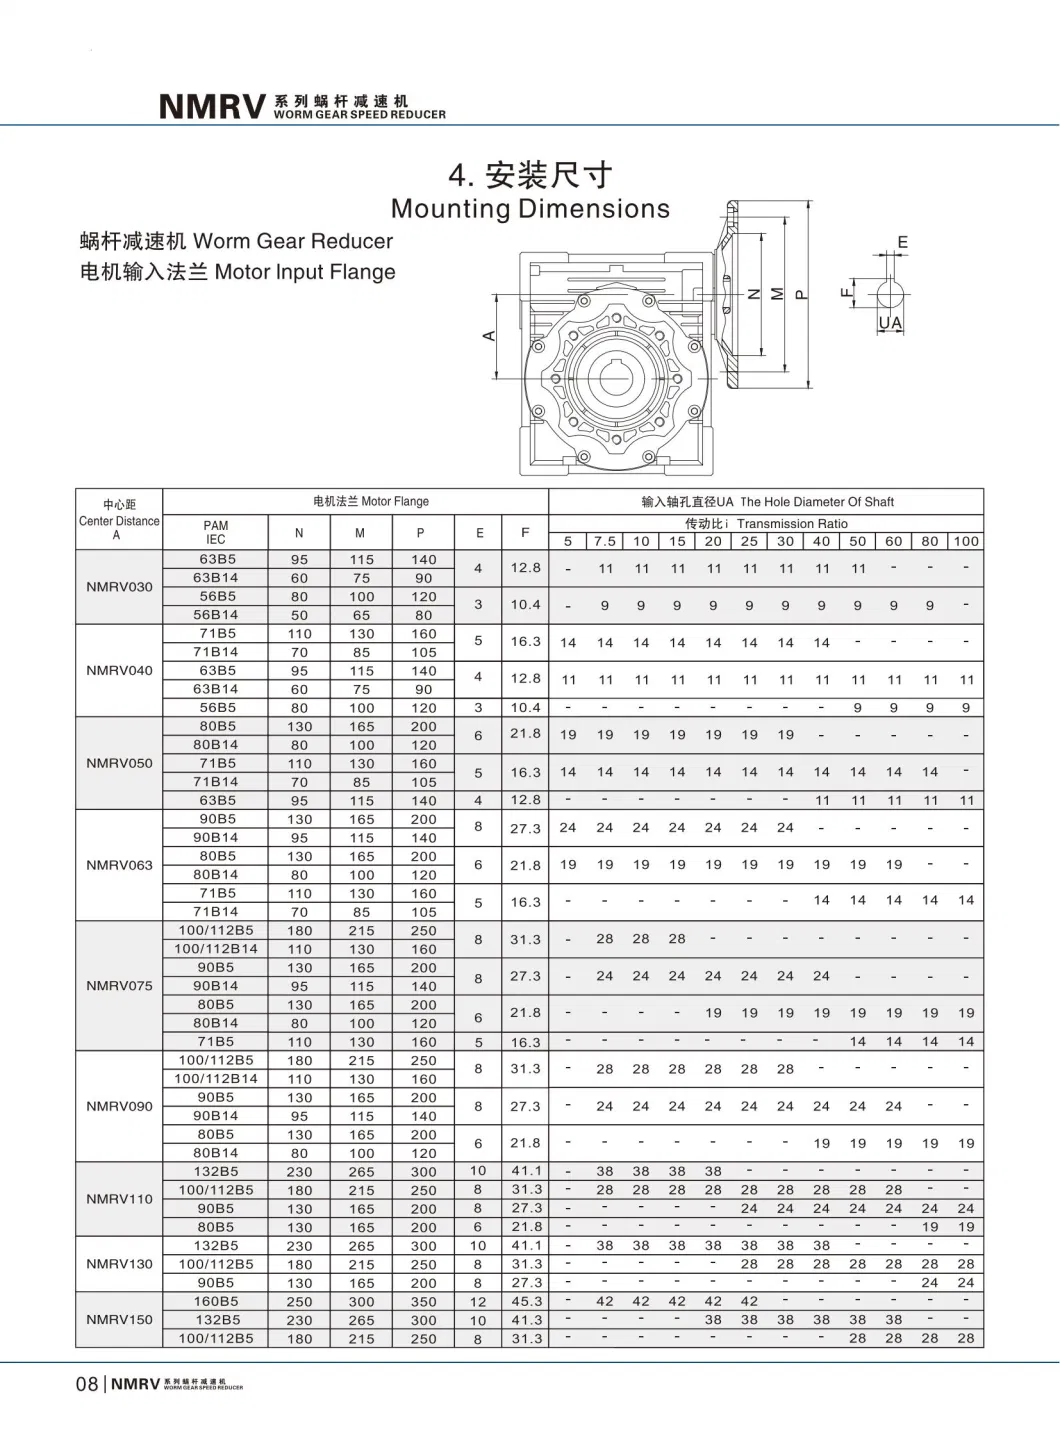 Mechanical Power Transmission RV Series Aluminium Alloy Worm Industrial Gearbox